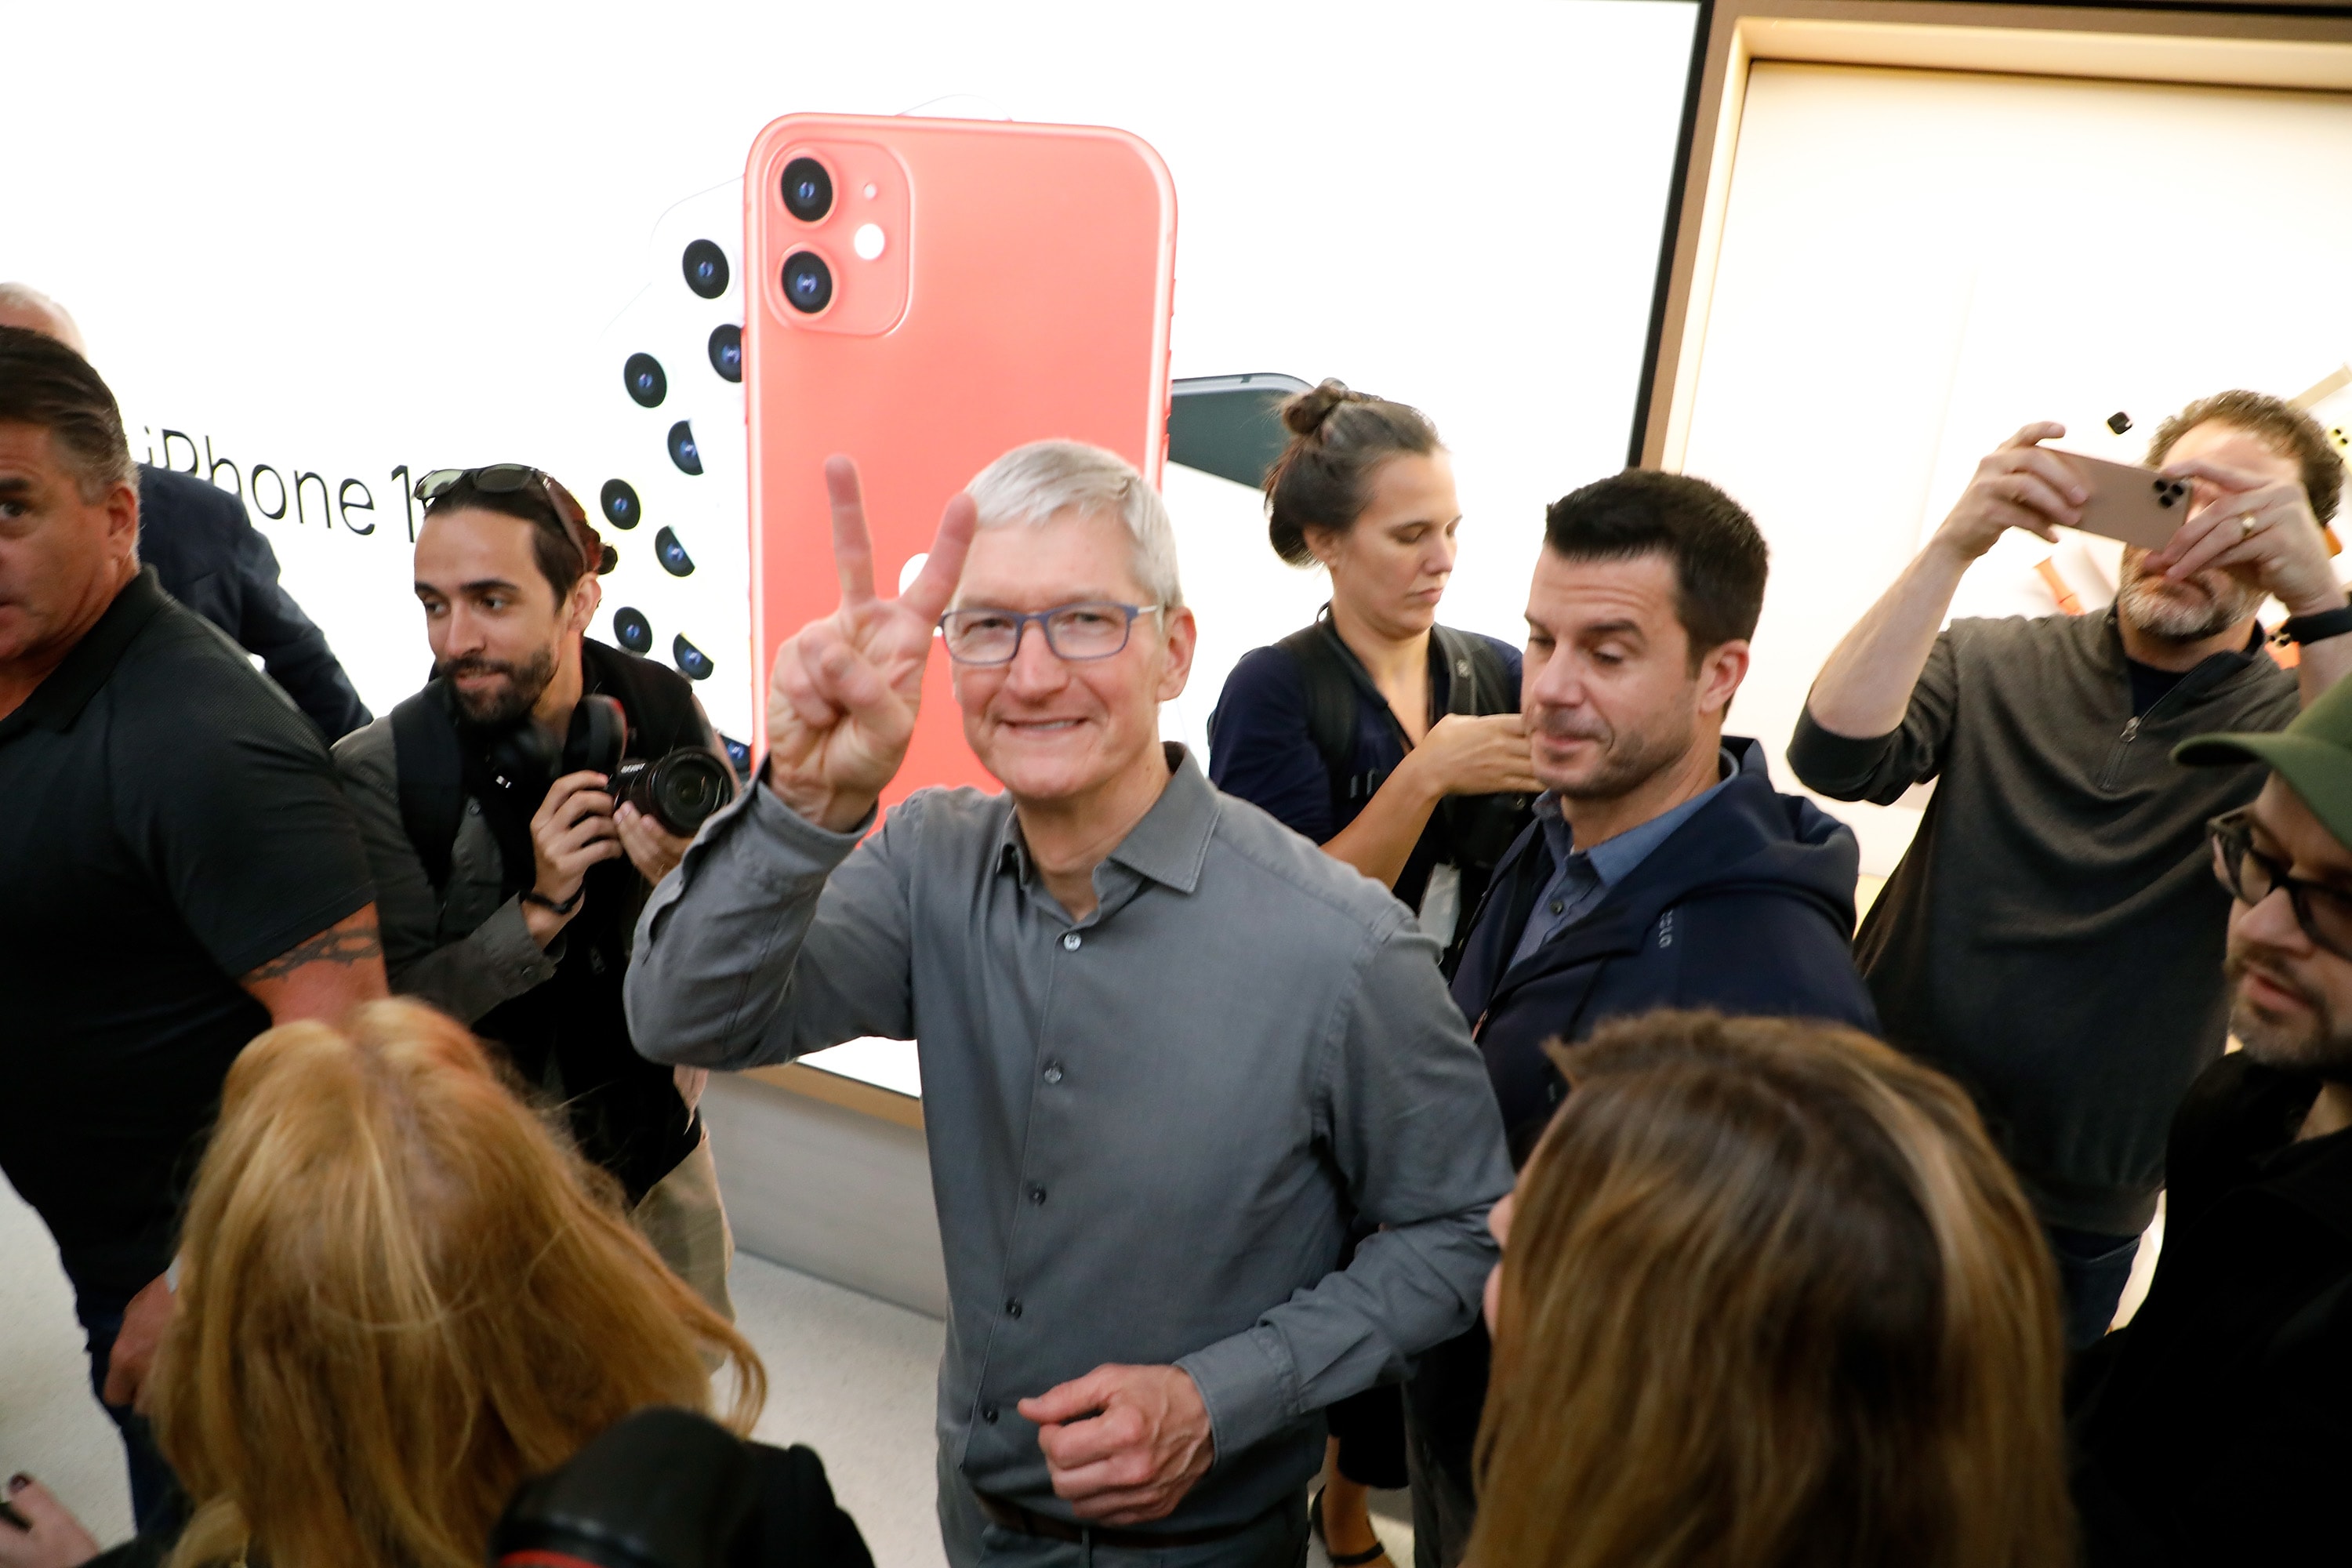 Apple now has $207.06 billion in cash on hand, up slightly from last quarter